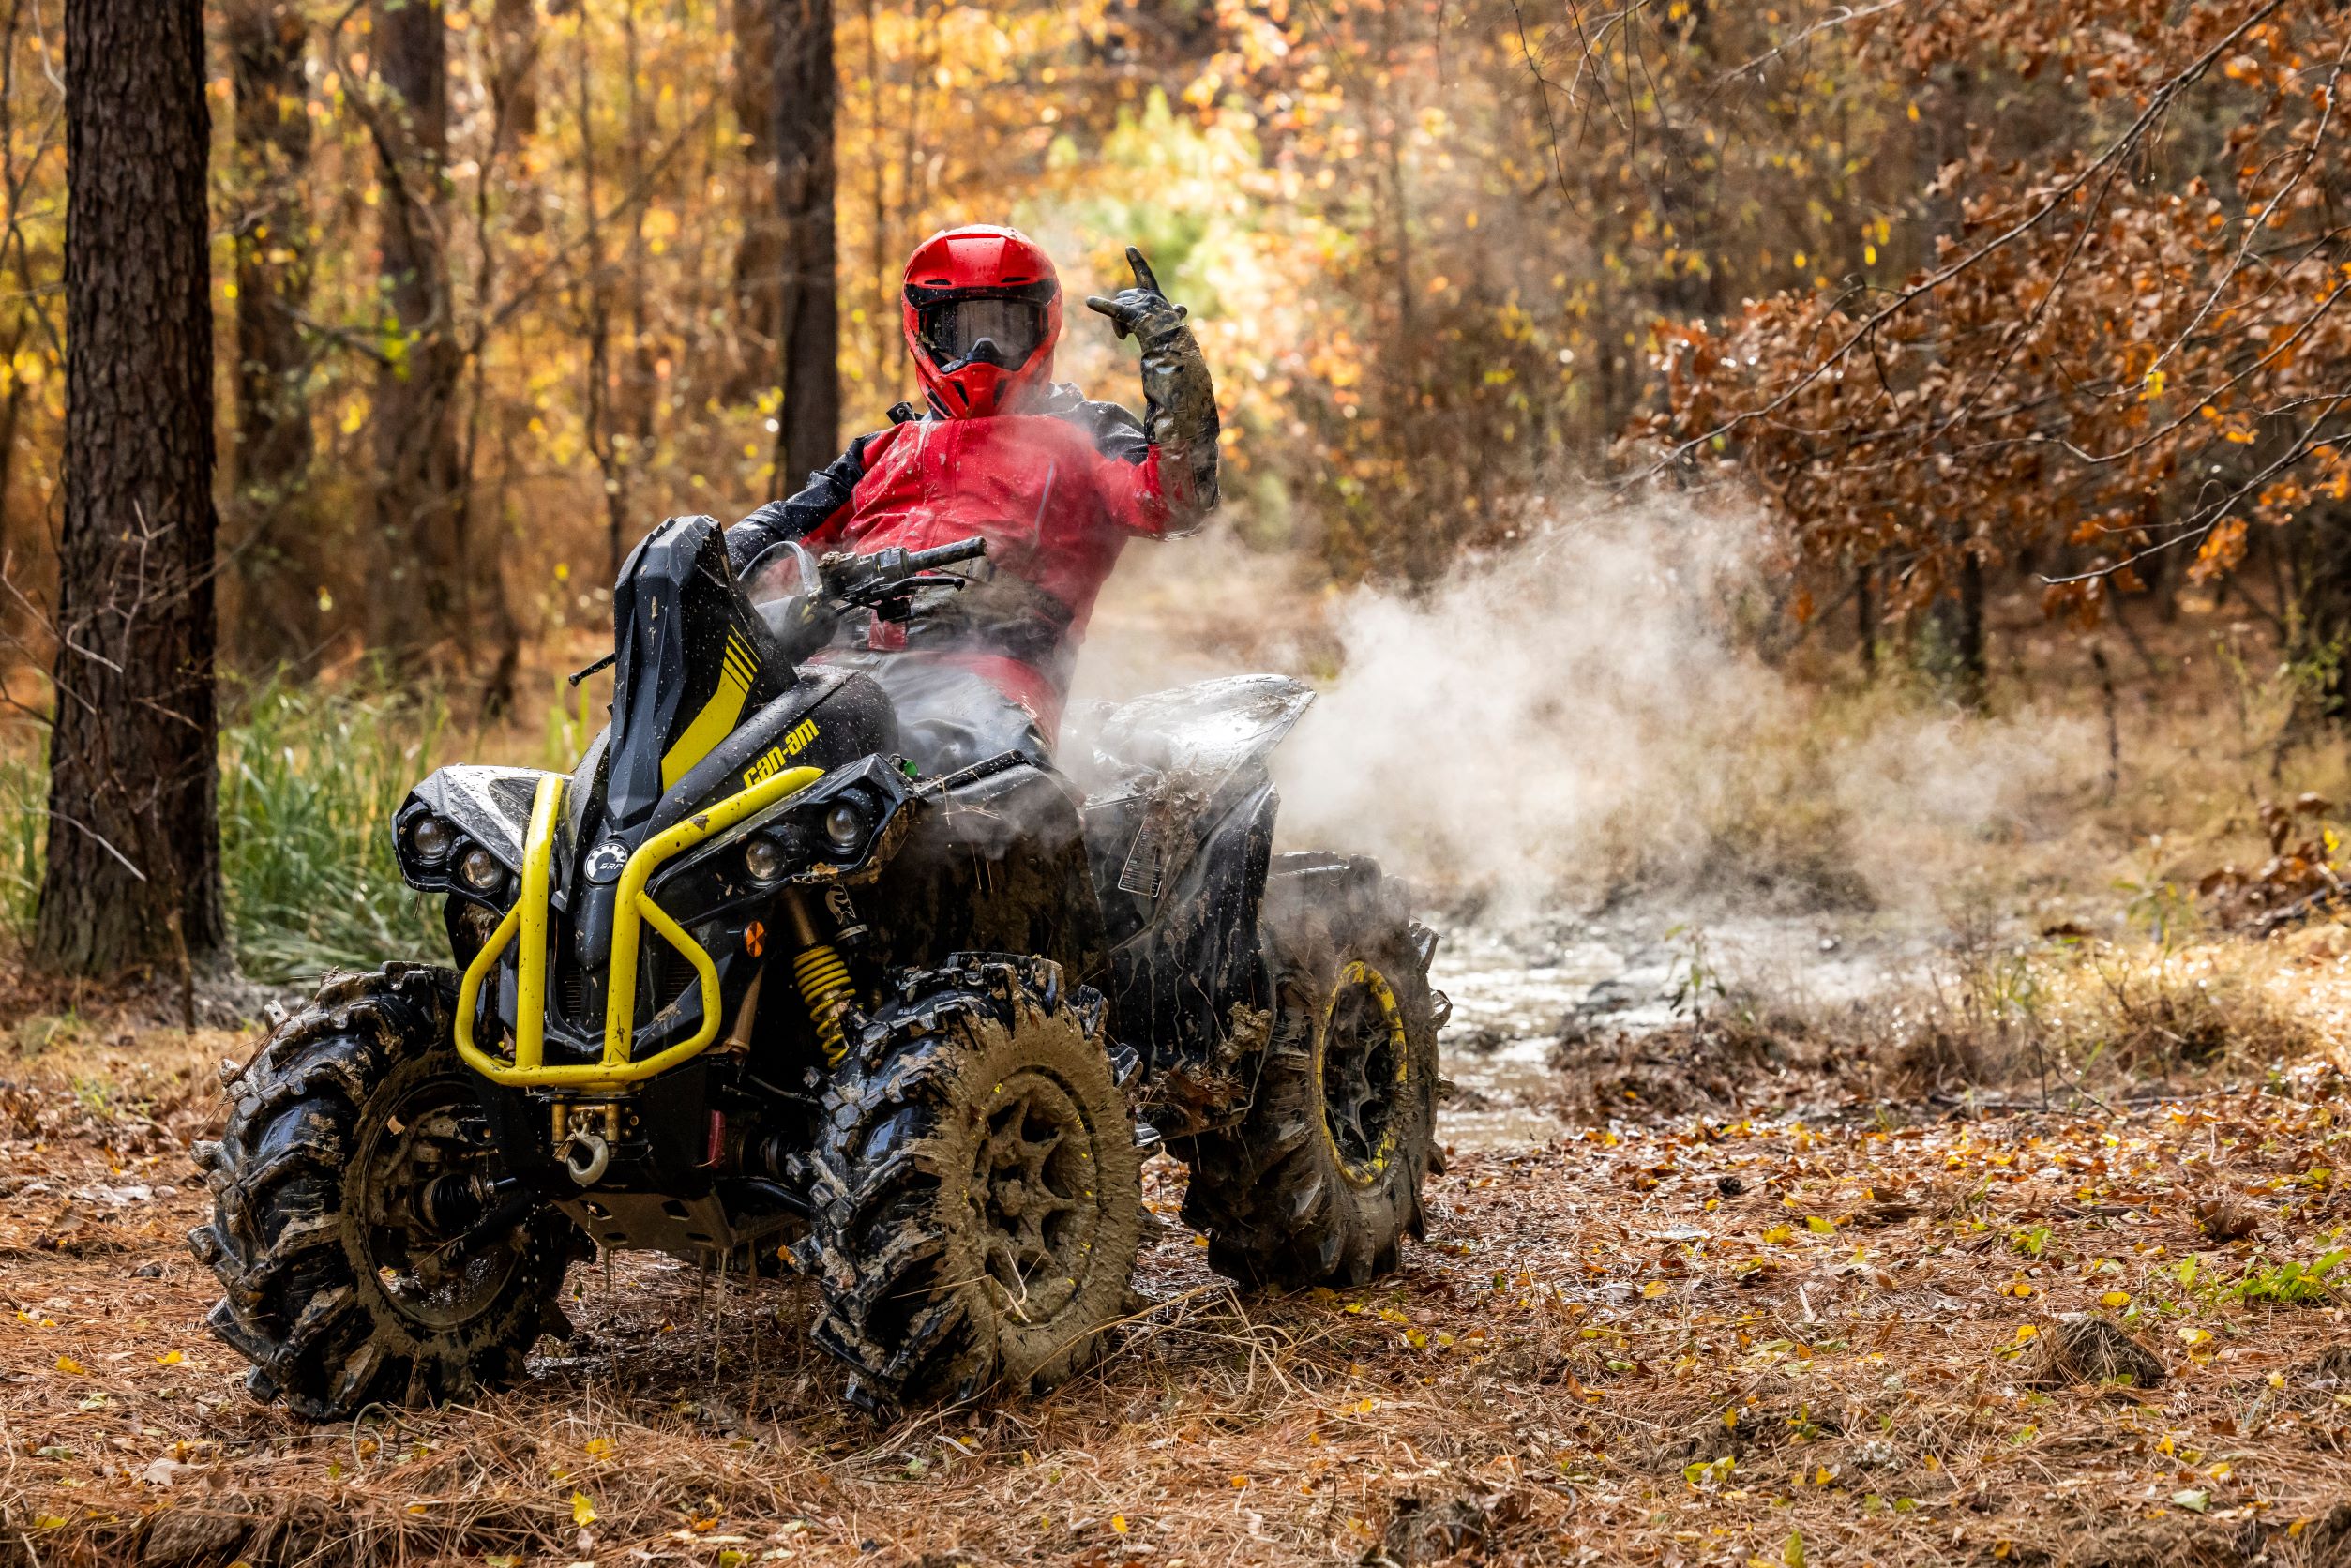 Can-Am rider posing on his Renegade X MR after a muddy ride, while steam rises from the vehicle. 